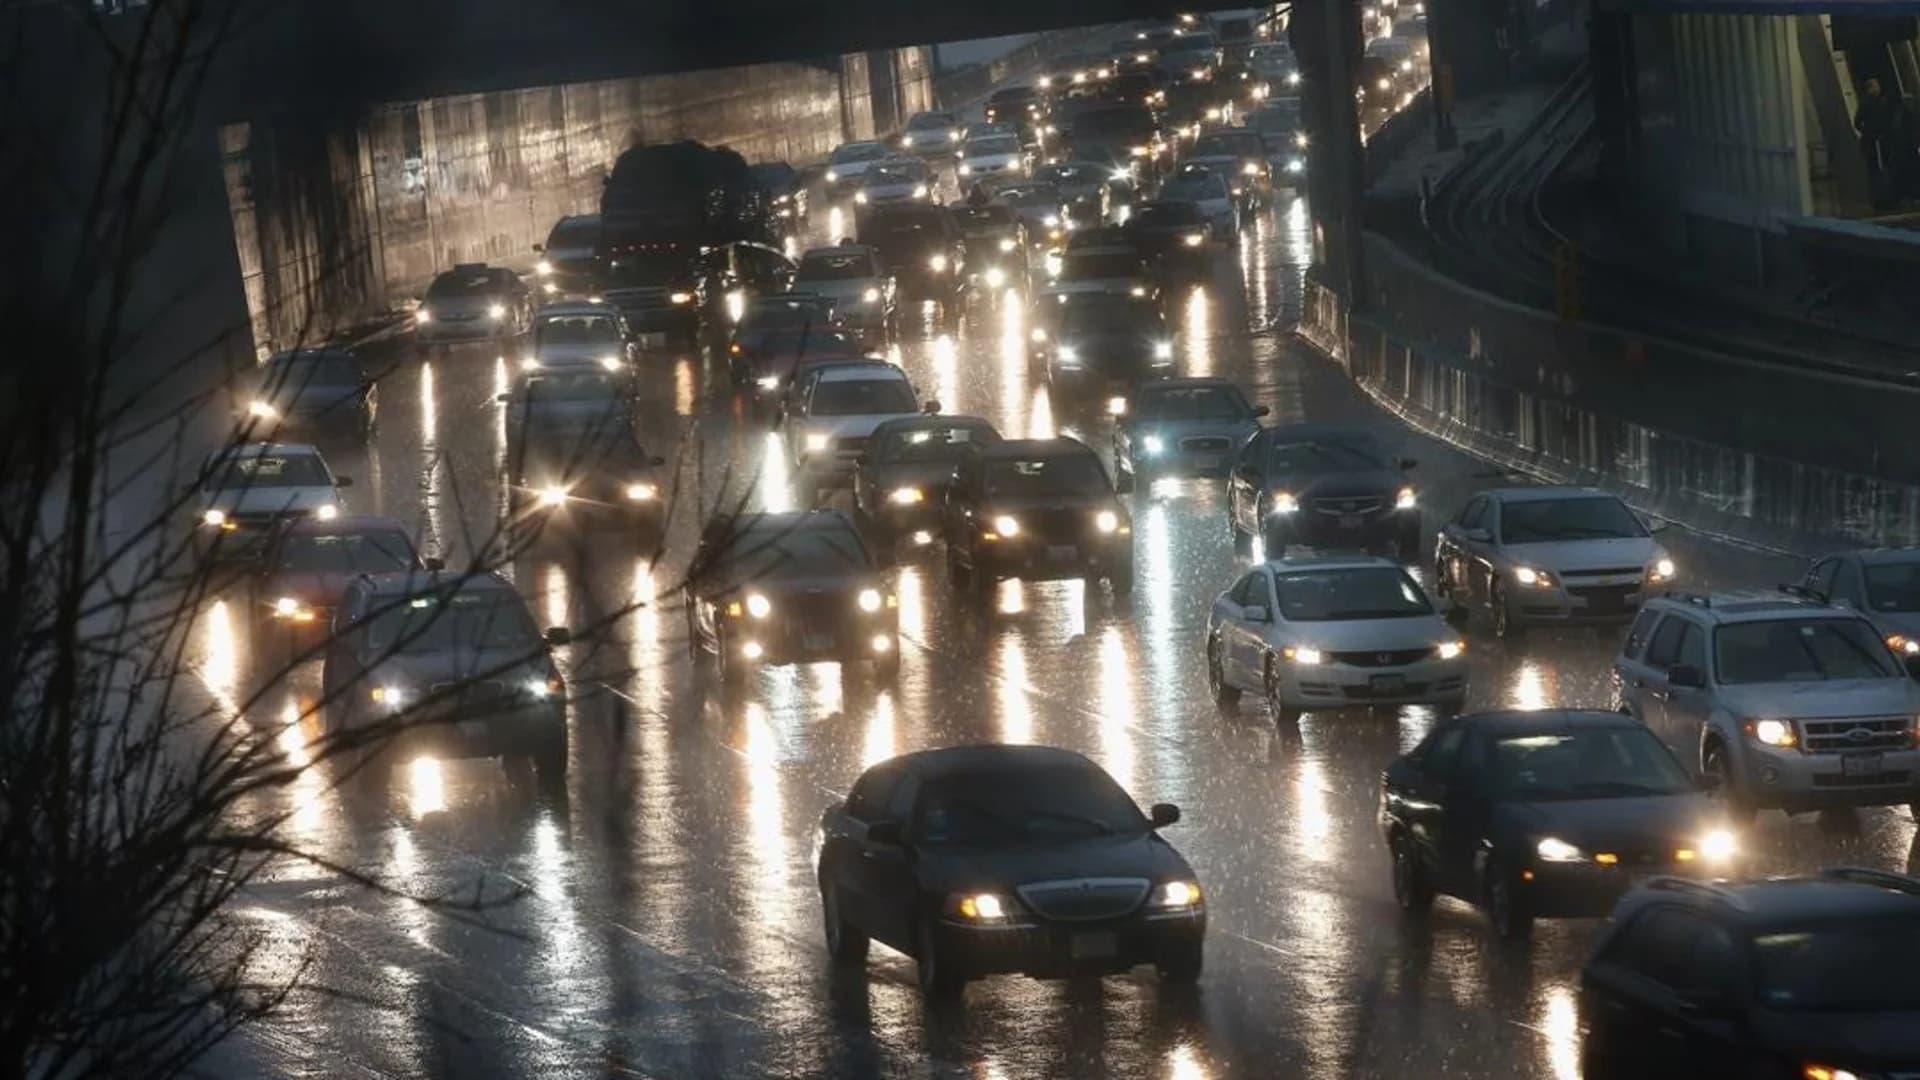 Soaking rain makes for dreary Monday evening commute